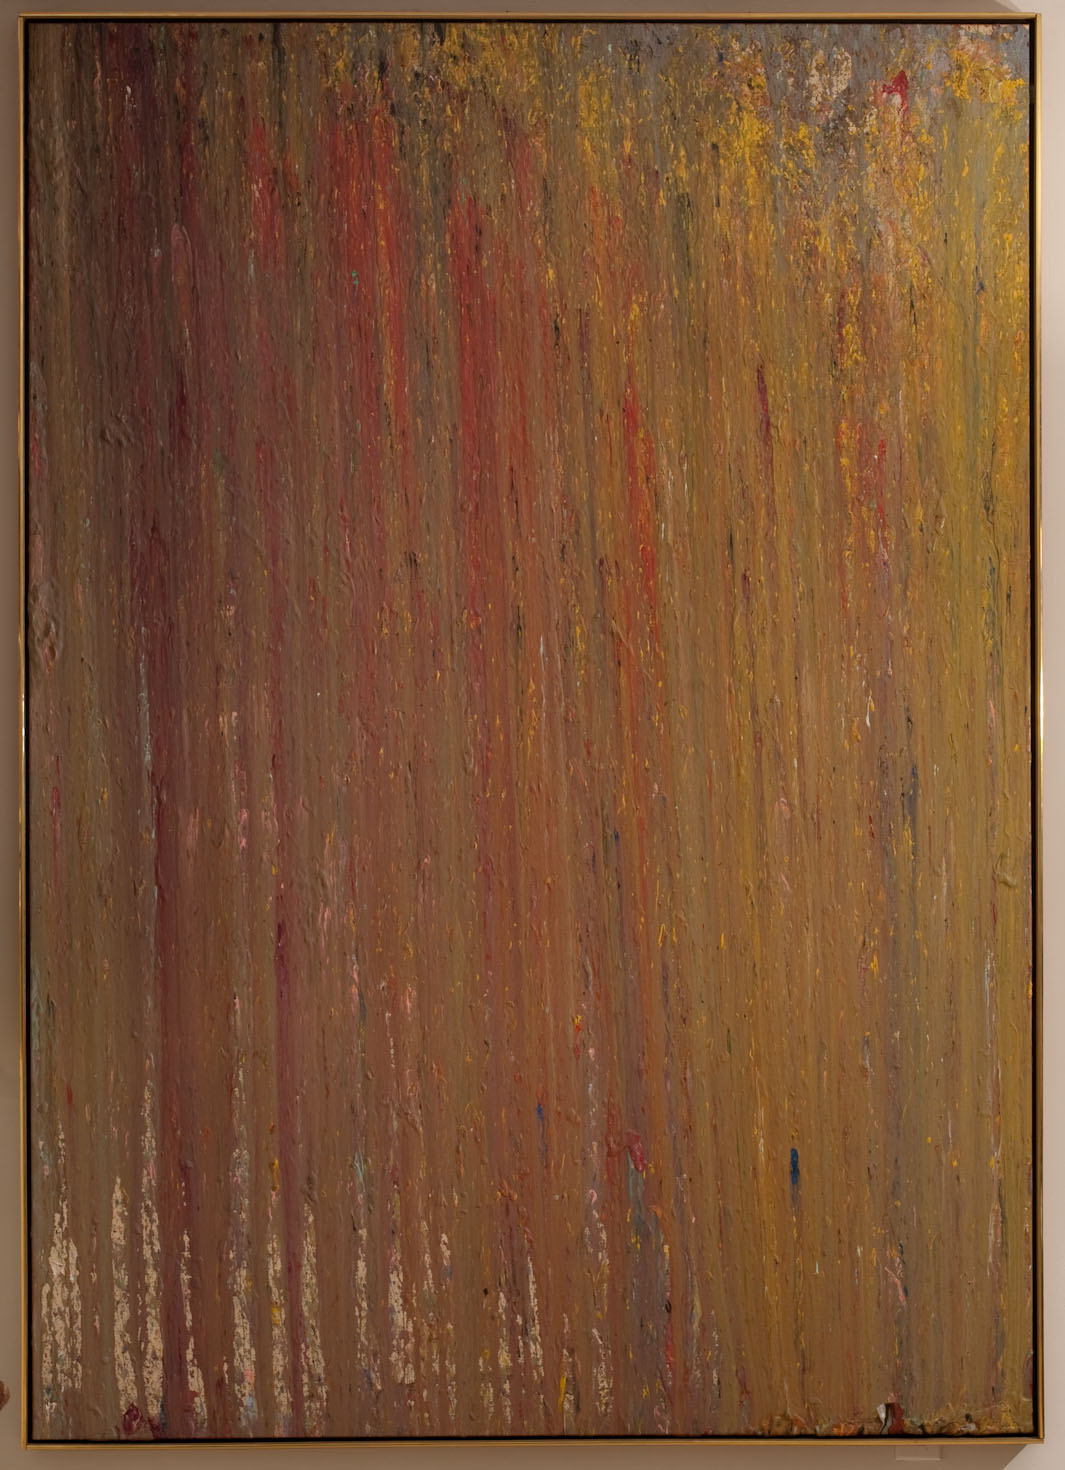  Larry Poons   Untitled , 1974 acrylic on canvas 81 1/2 x 57 1/2 inches (207 x 146 cm) 